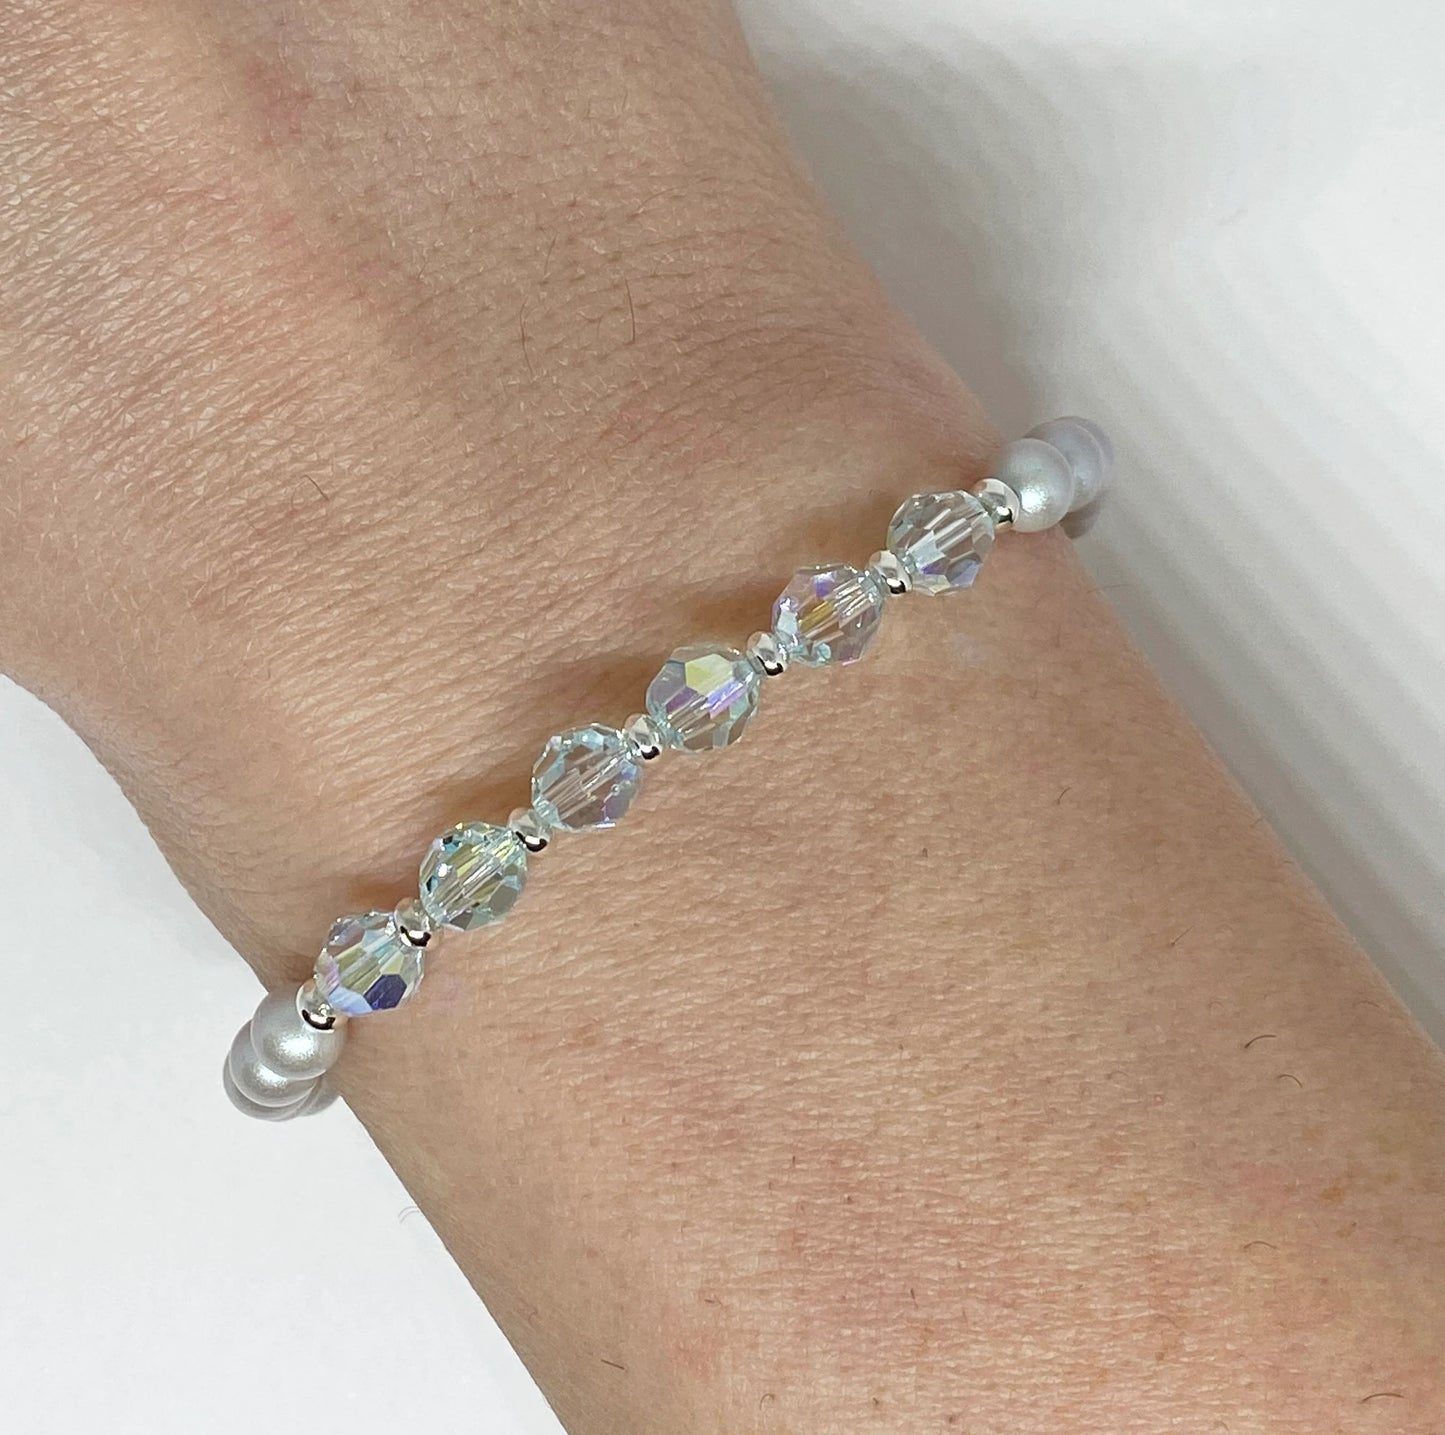 Swarovski Round Crystal and Pearl Bracelet in Lt Azore AB and Iridescent Dove Gray